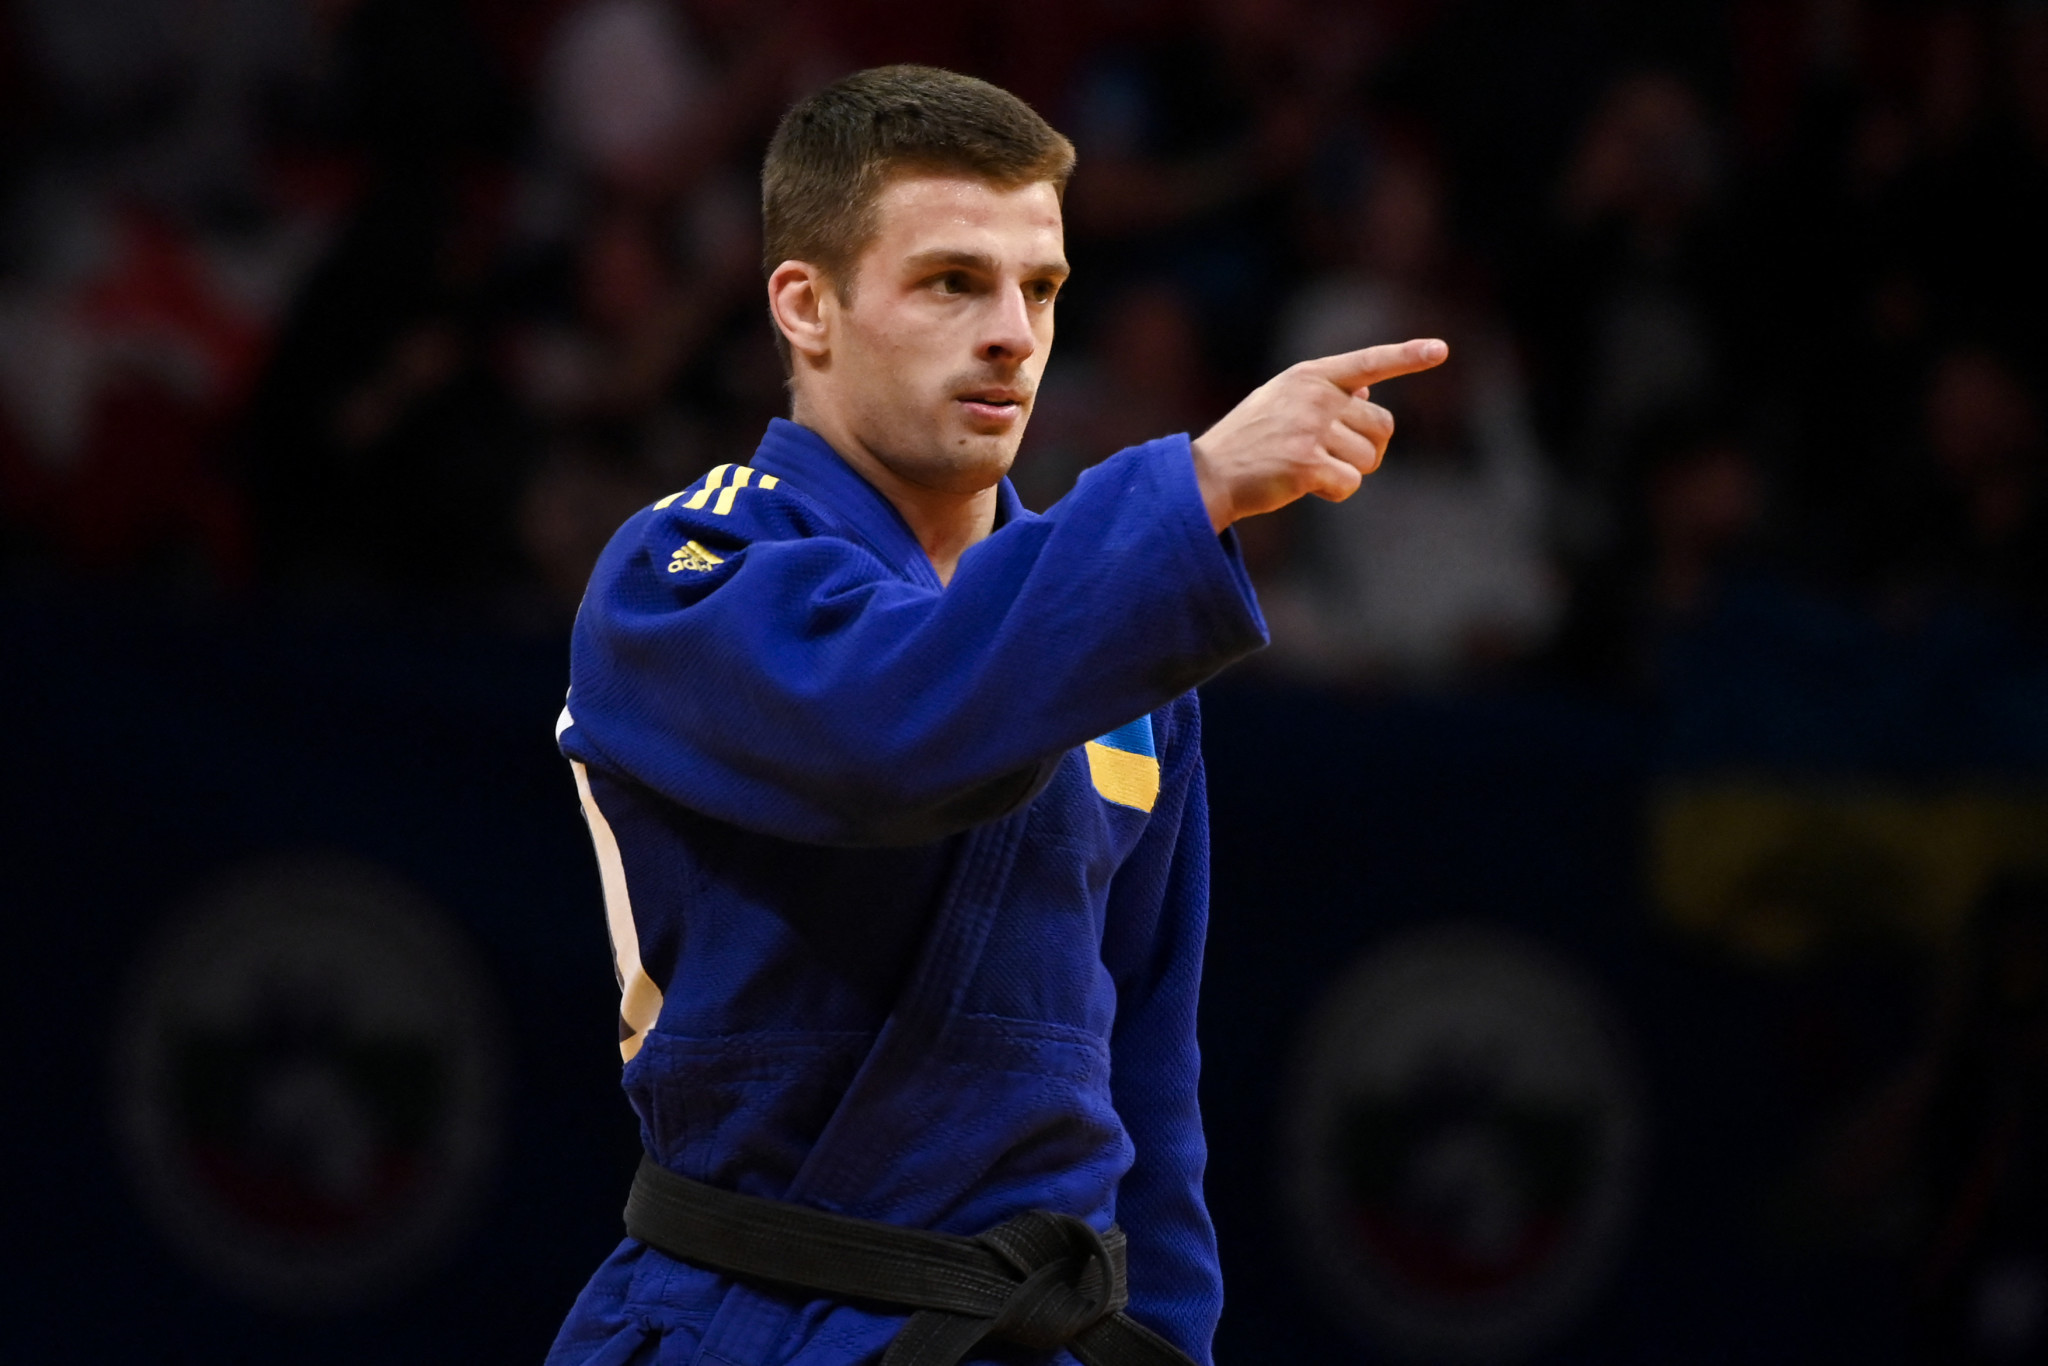 Bogdan Iadov won a gold medal on the opening day of the European Judo Championships ©Getty Images